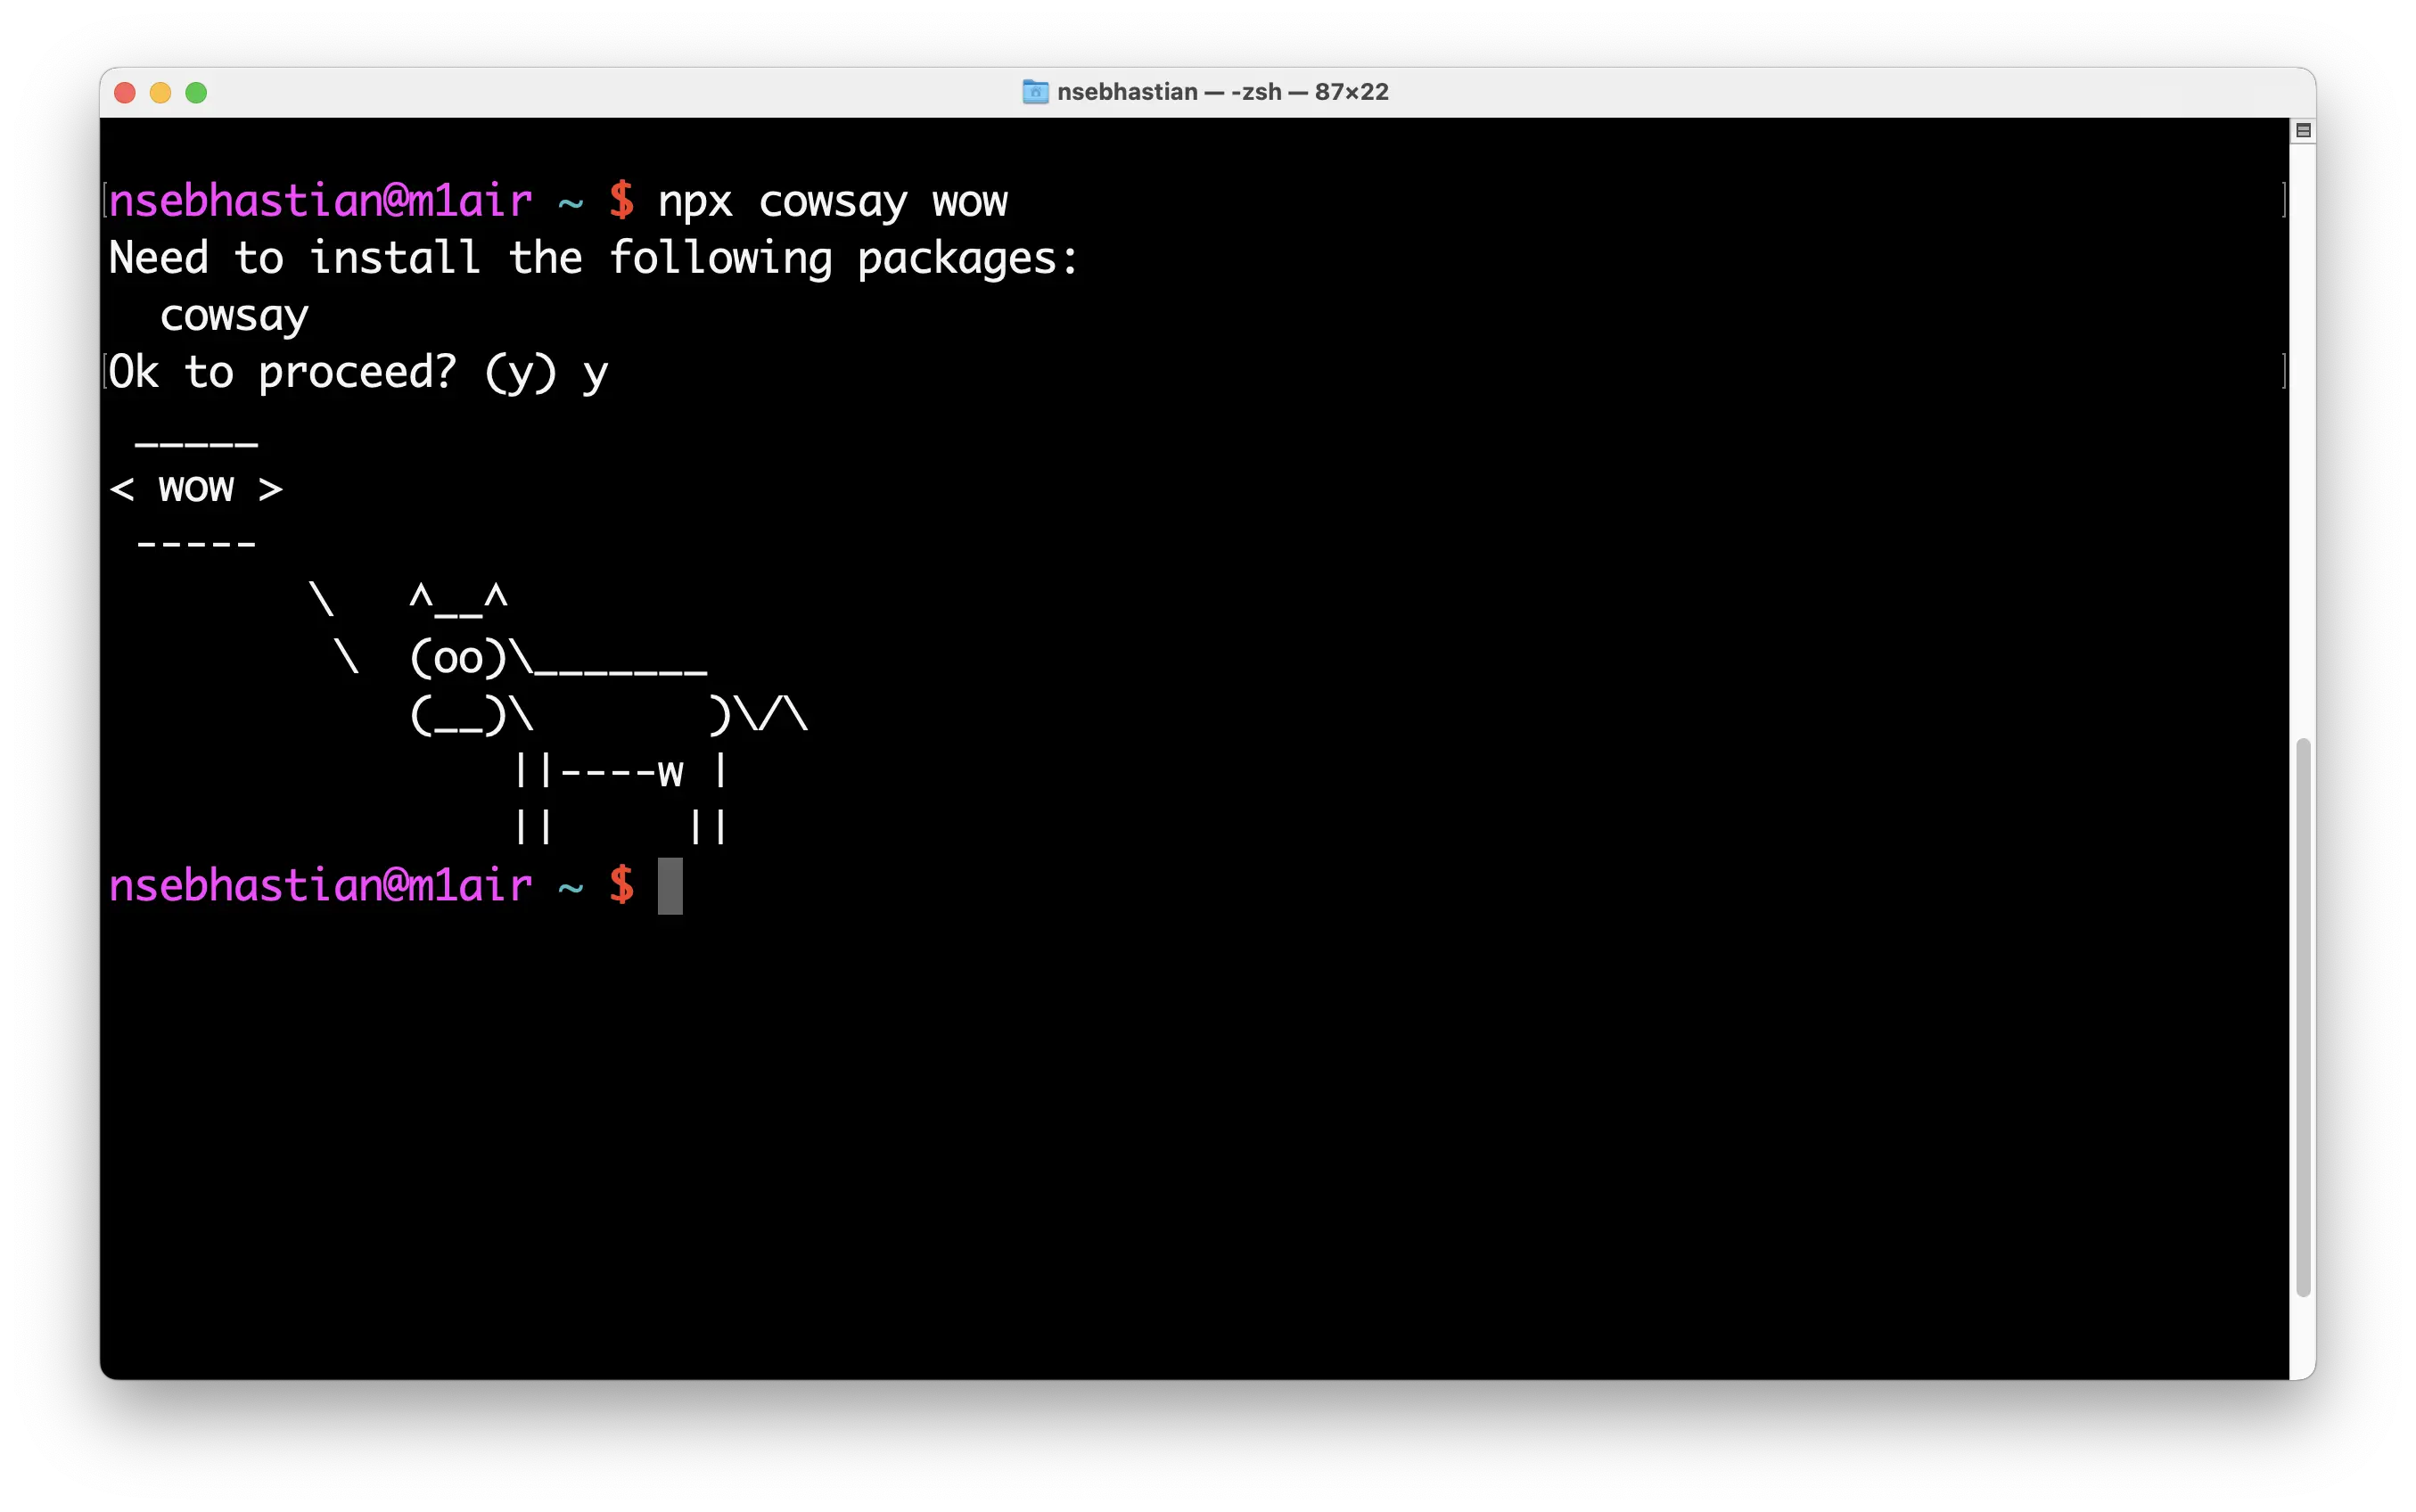 npx asks to install cowsay the first time